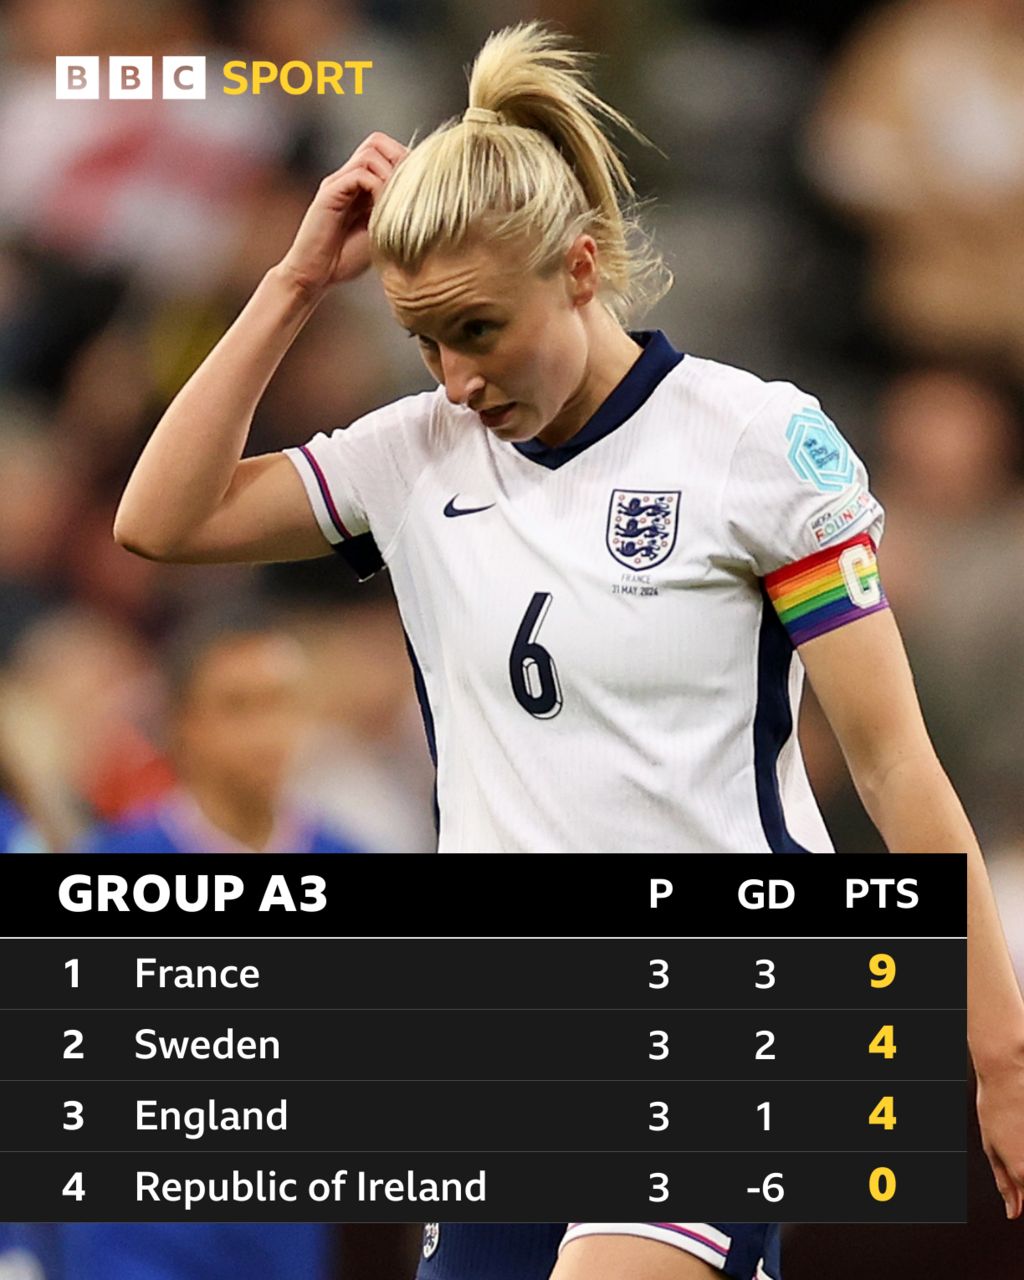 Group A3 in Women's Euro 2025 qualifying: France 9, Sweden 4, England 4, Republic of Ireland 0